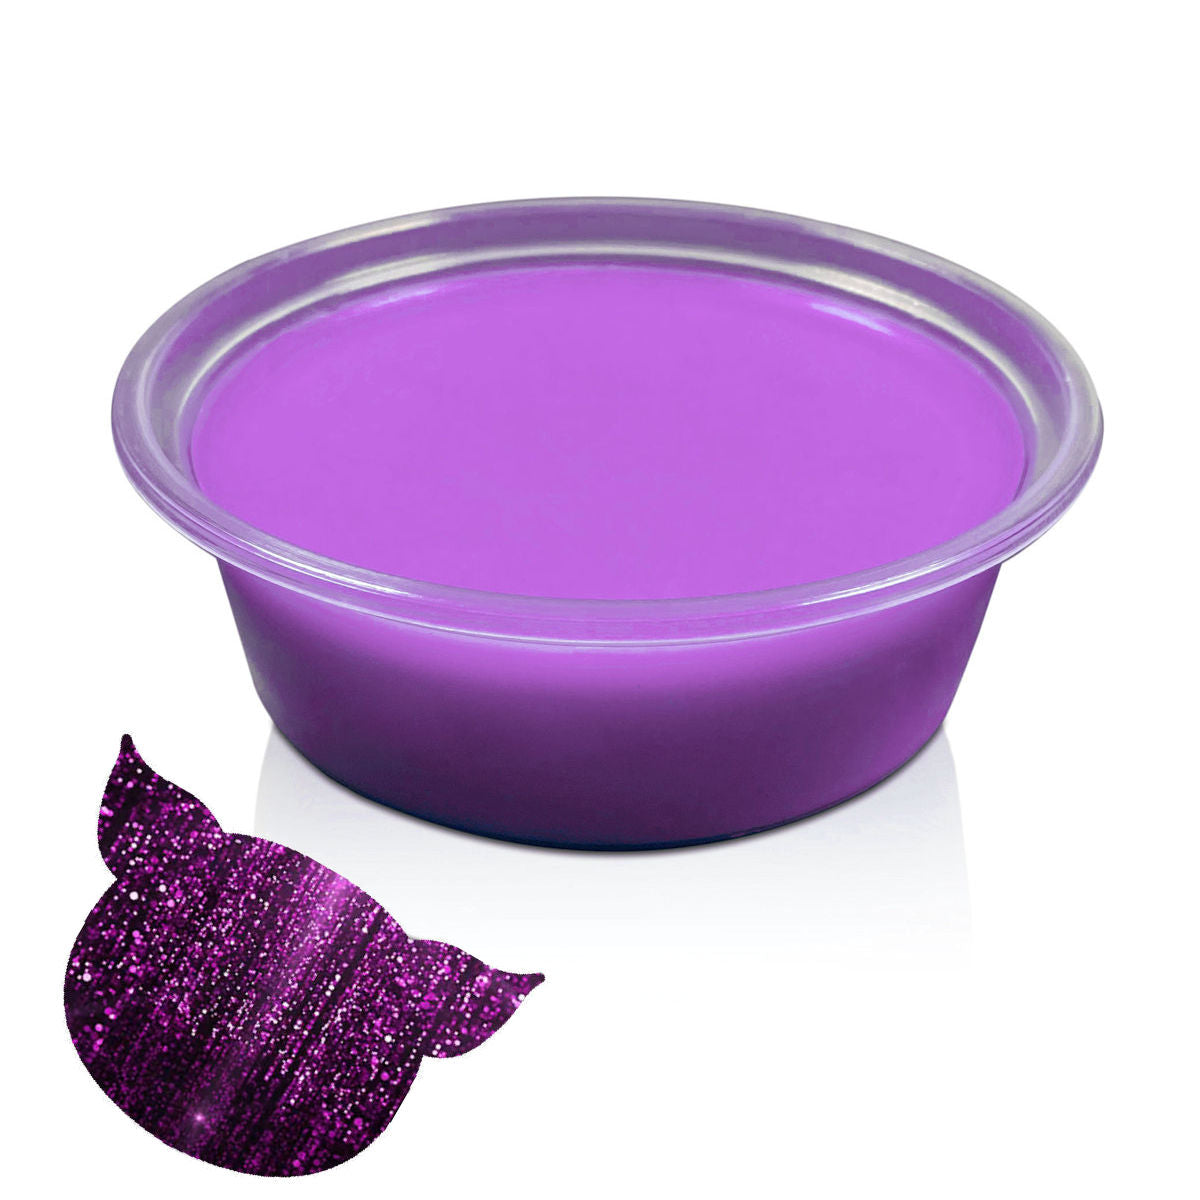 Stinky Pig Highly Scented Soy Wax Melt Pot - 40g Purple Rain